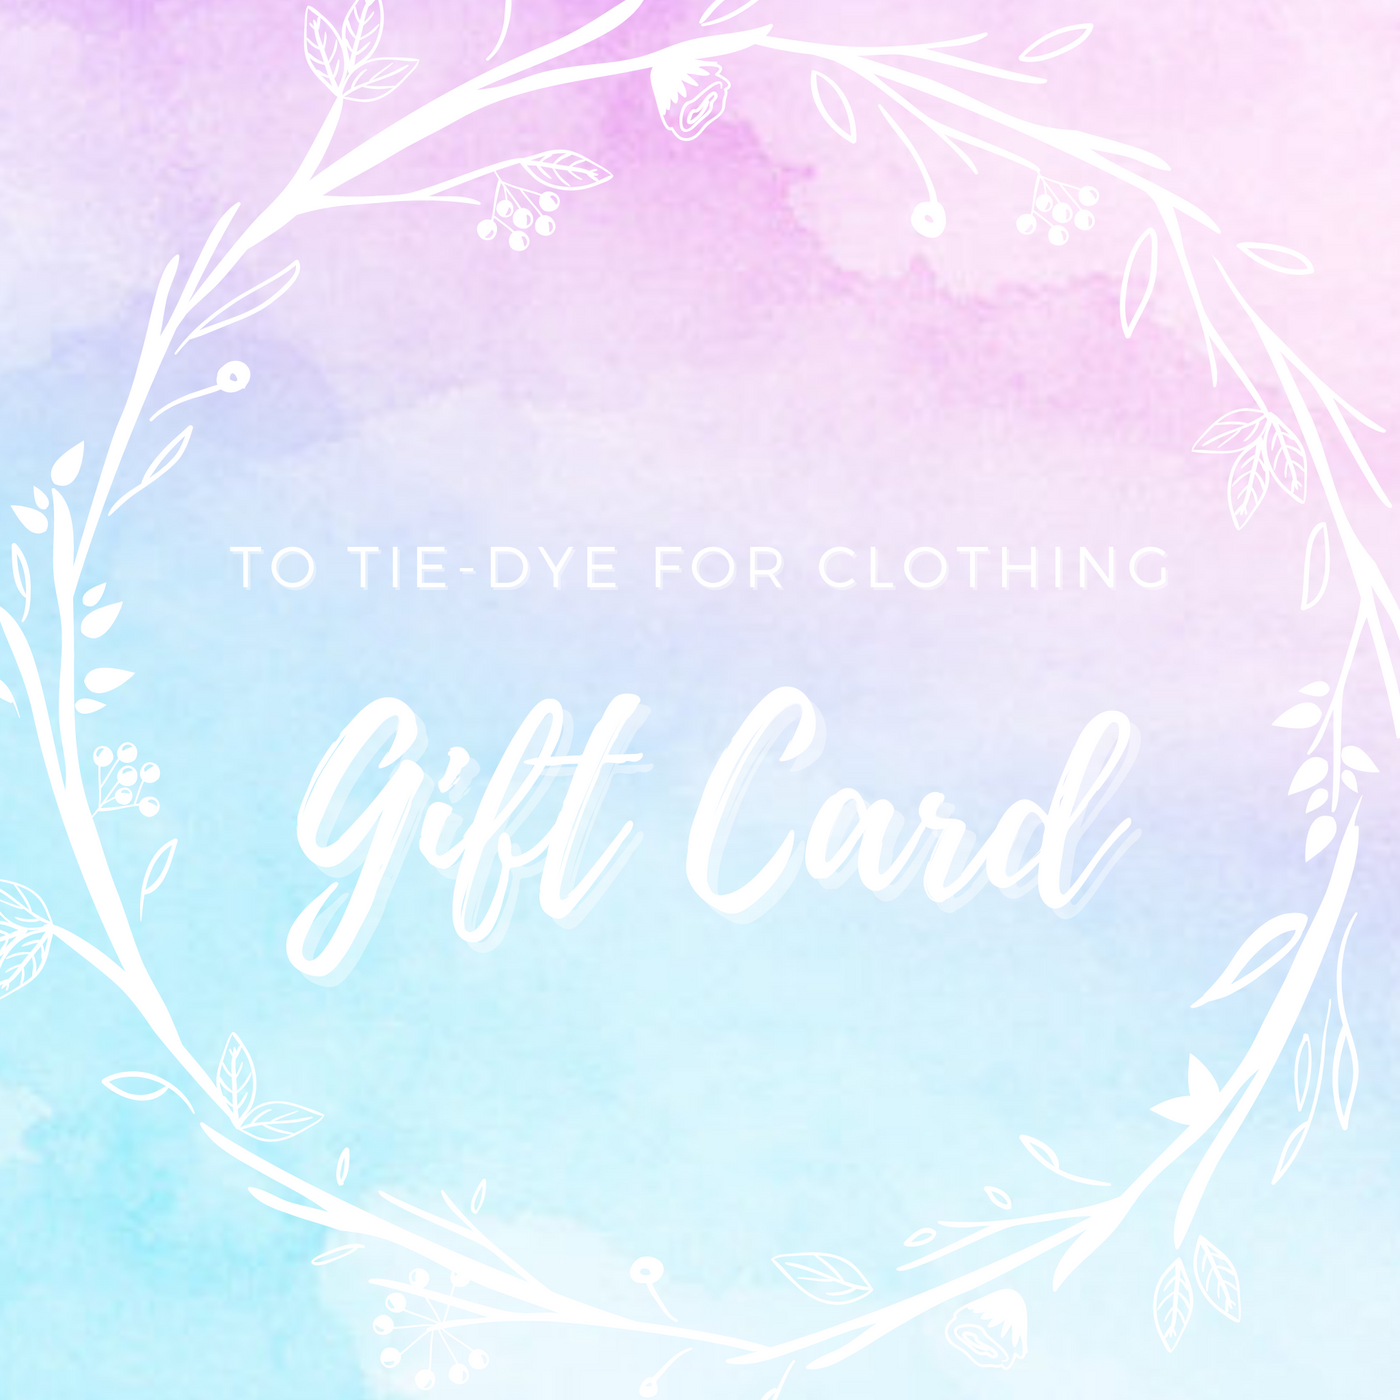 To Tie-Dye for Clothing Gift Card